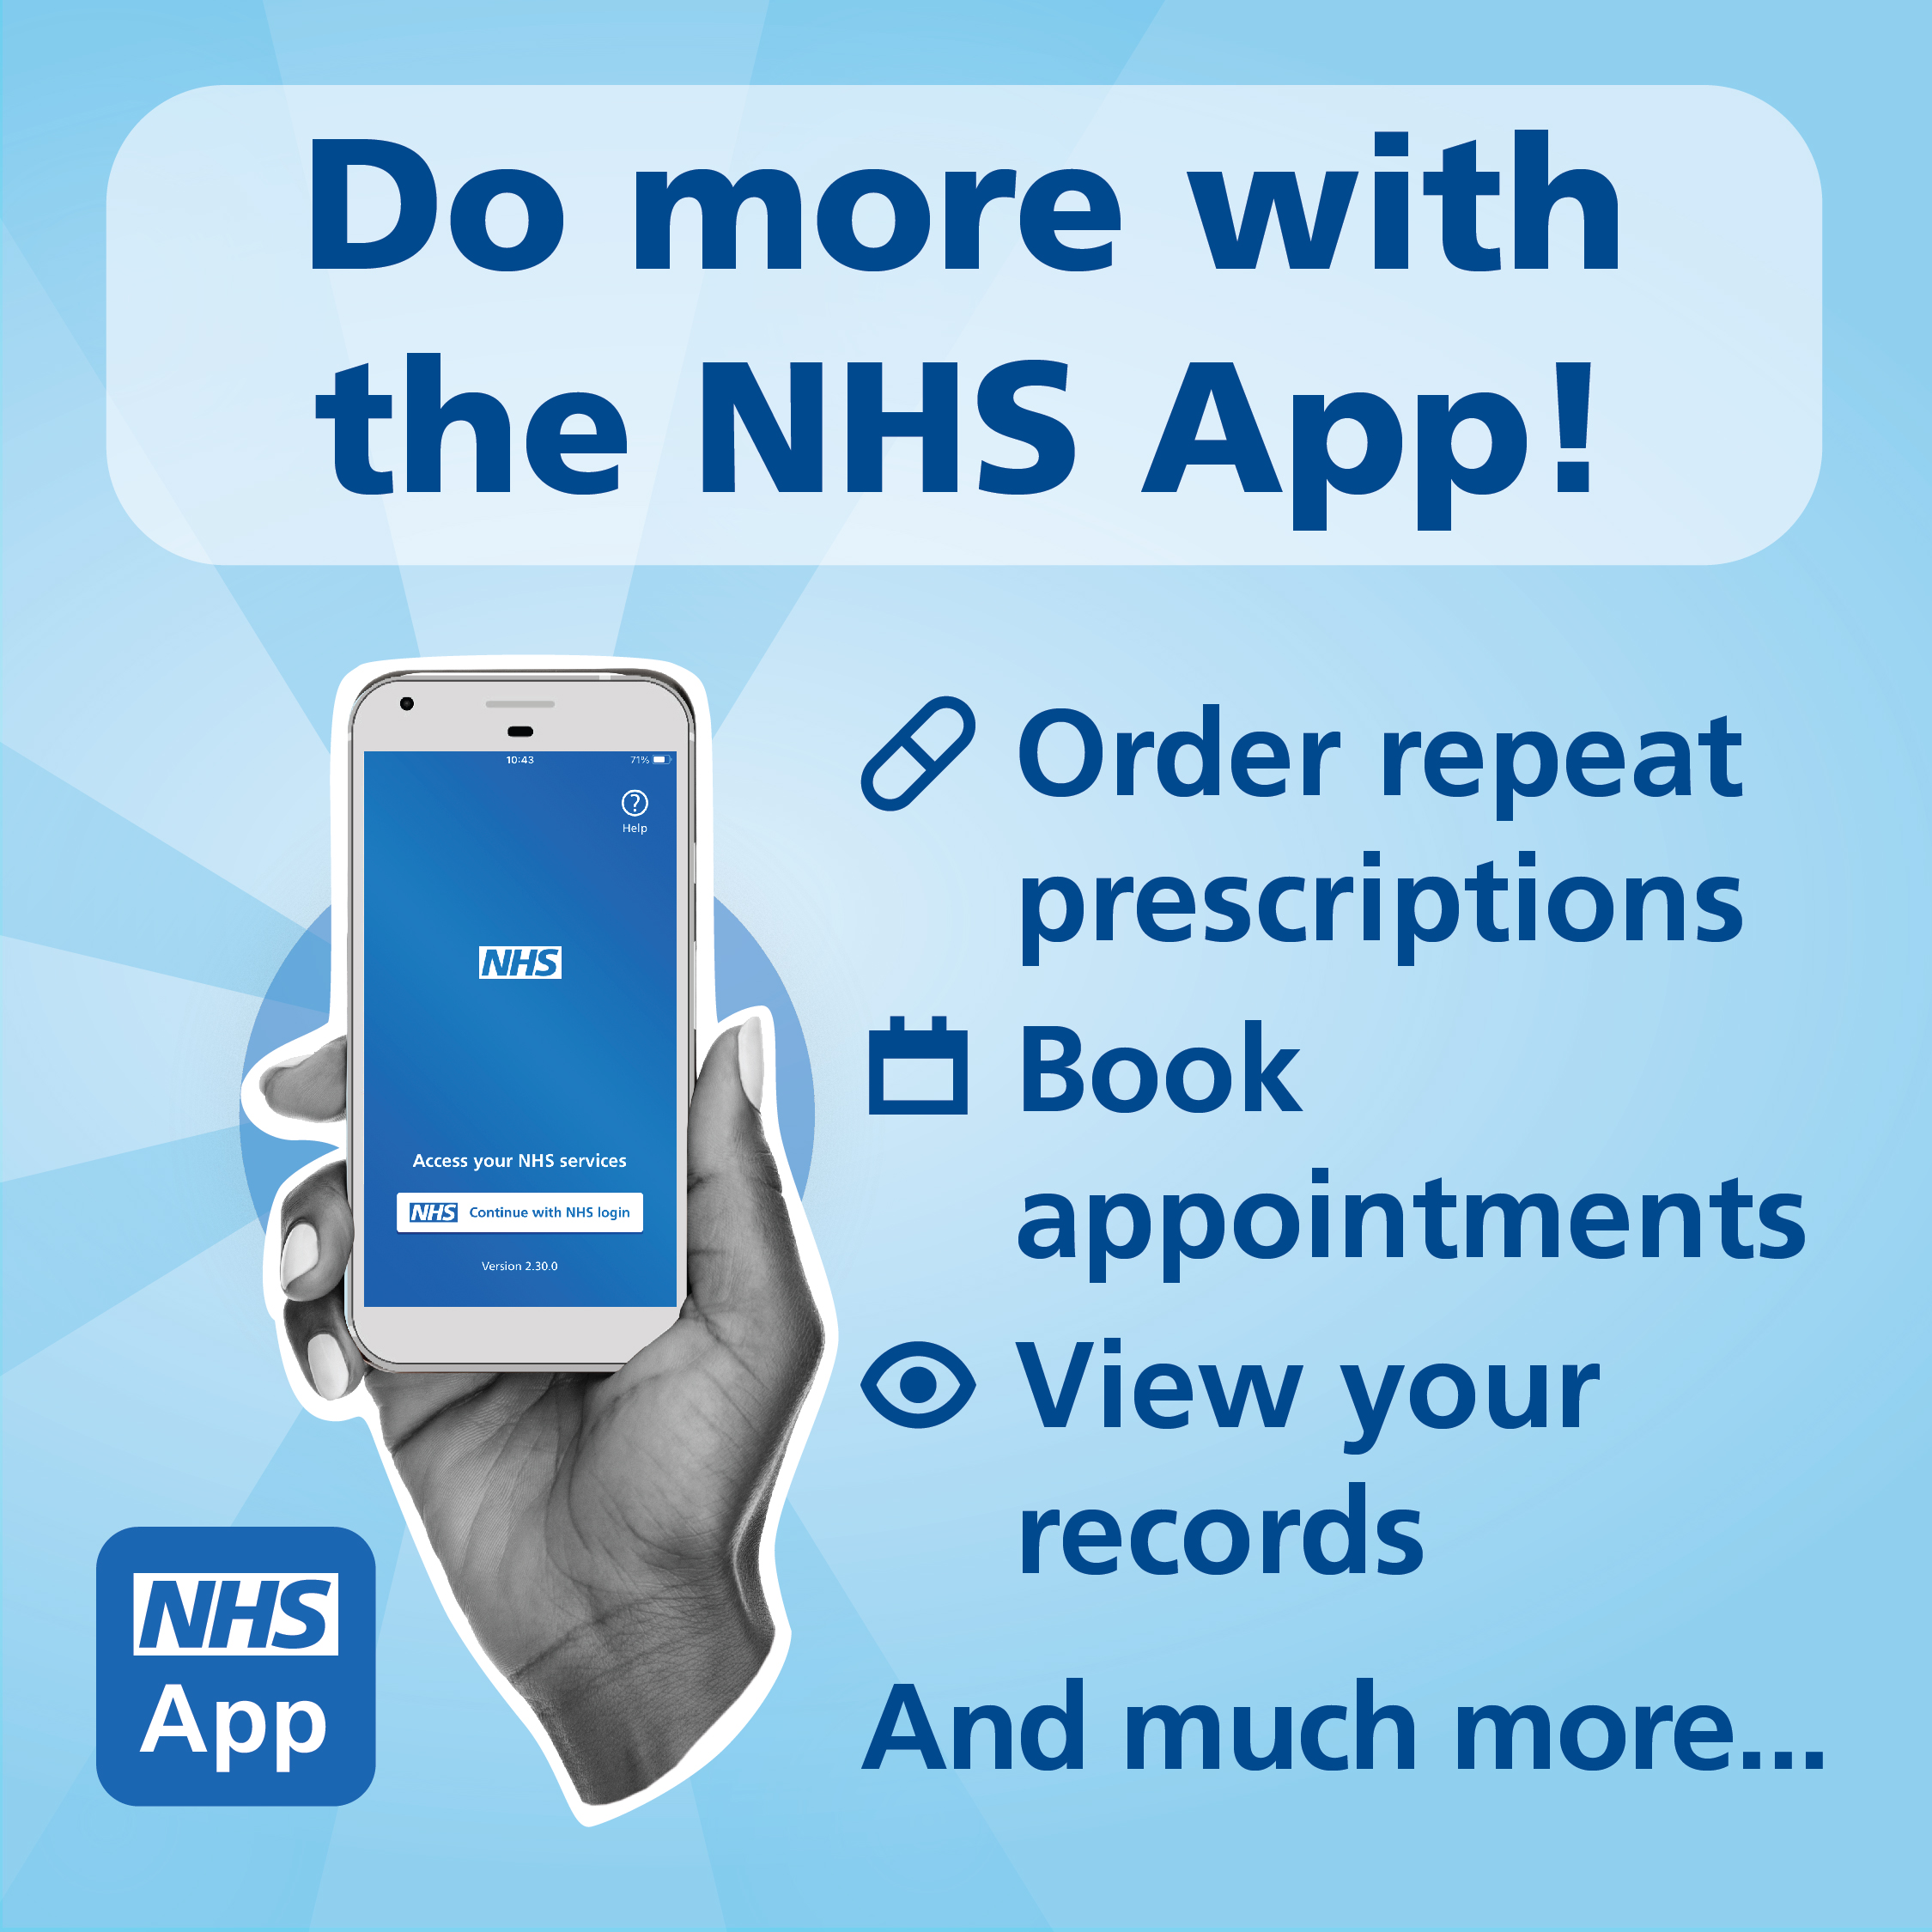 Do more with the NHS App - order repeat prescriptions, book appointments, view your records and much more...